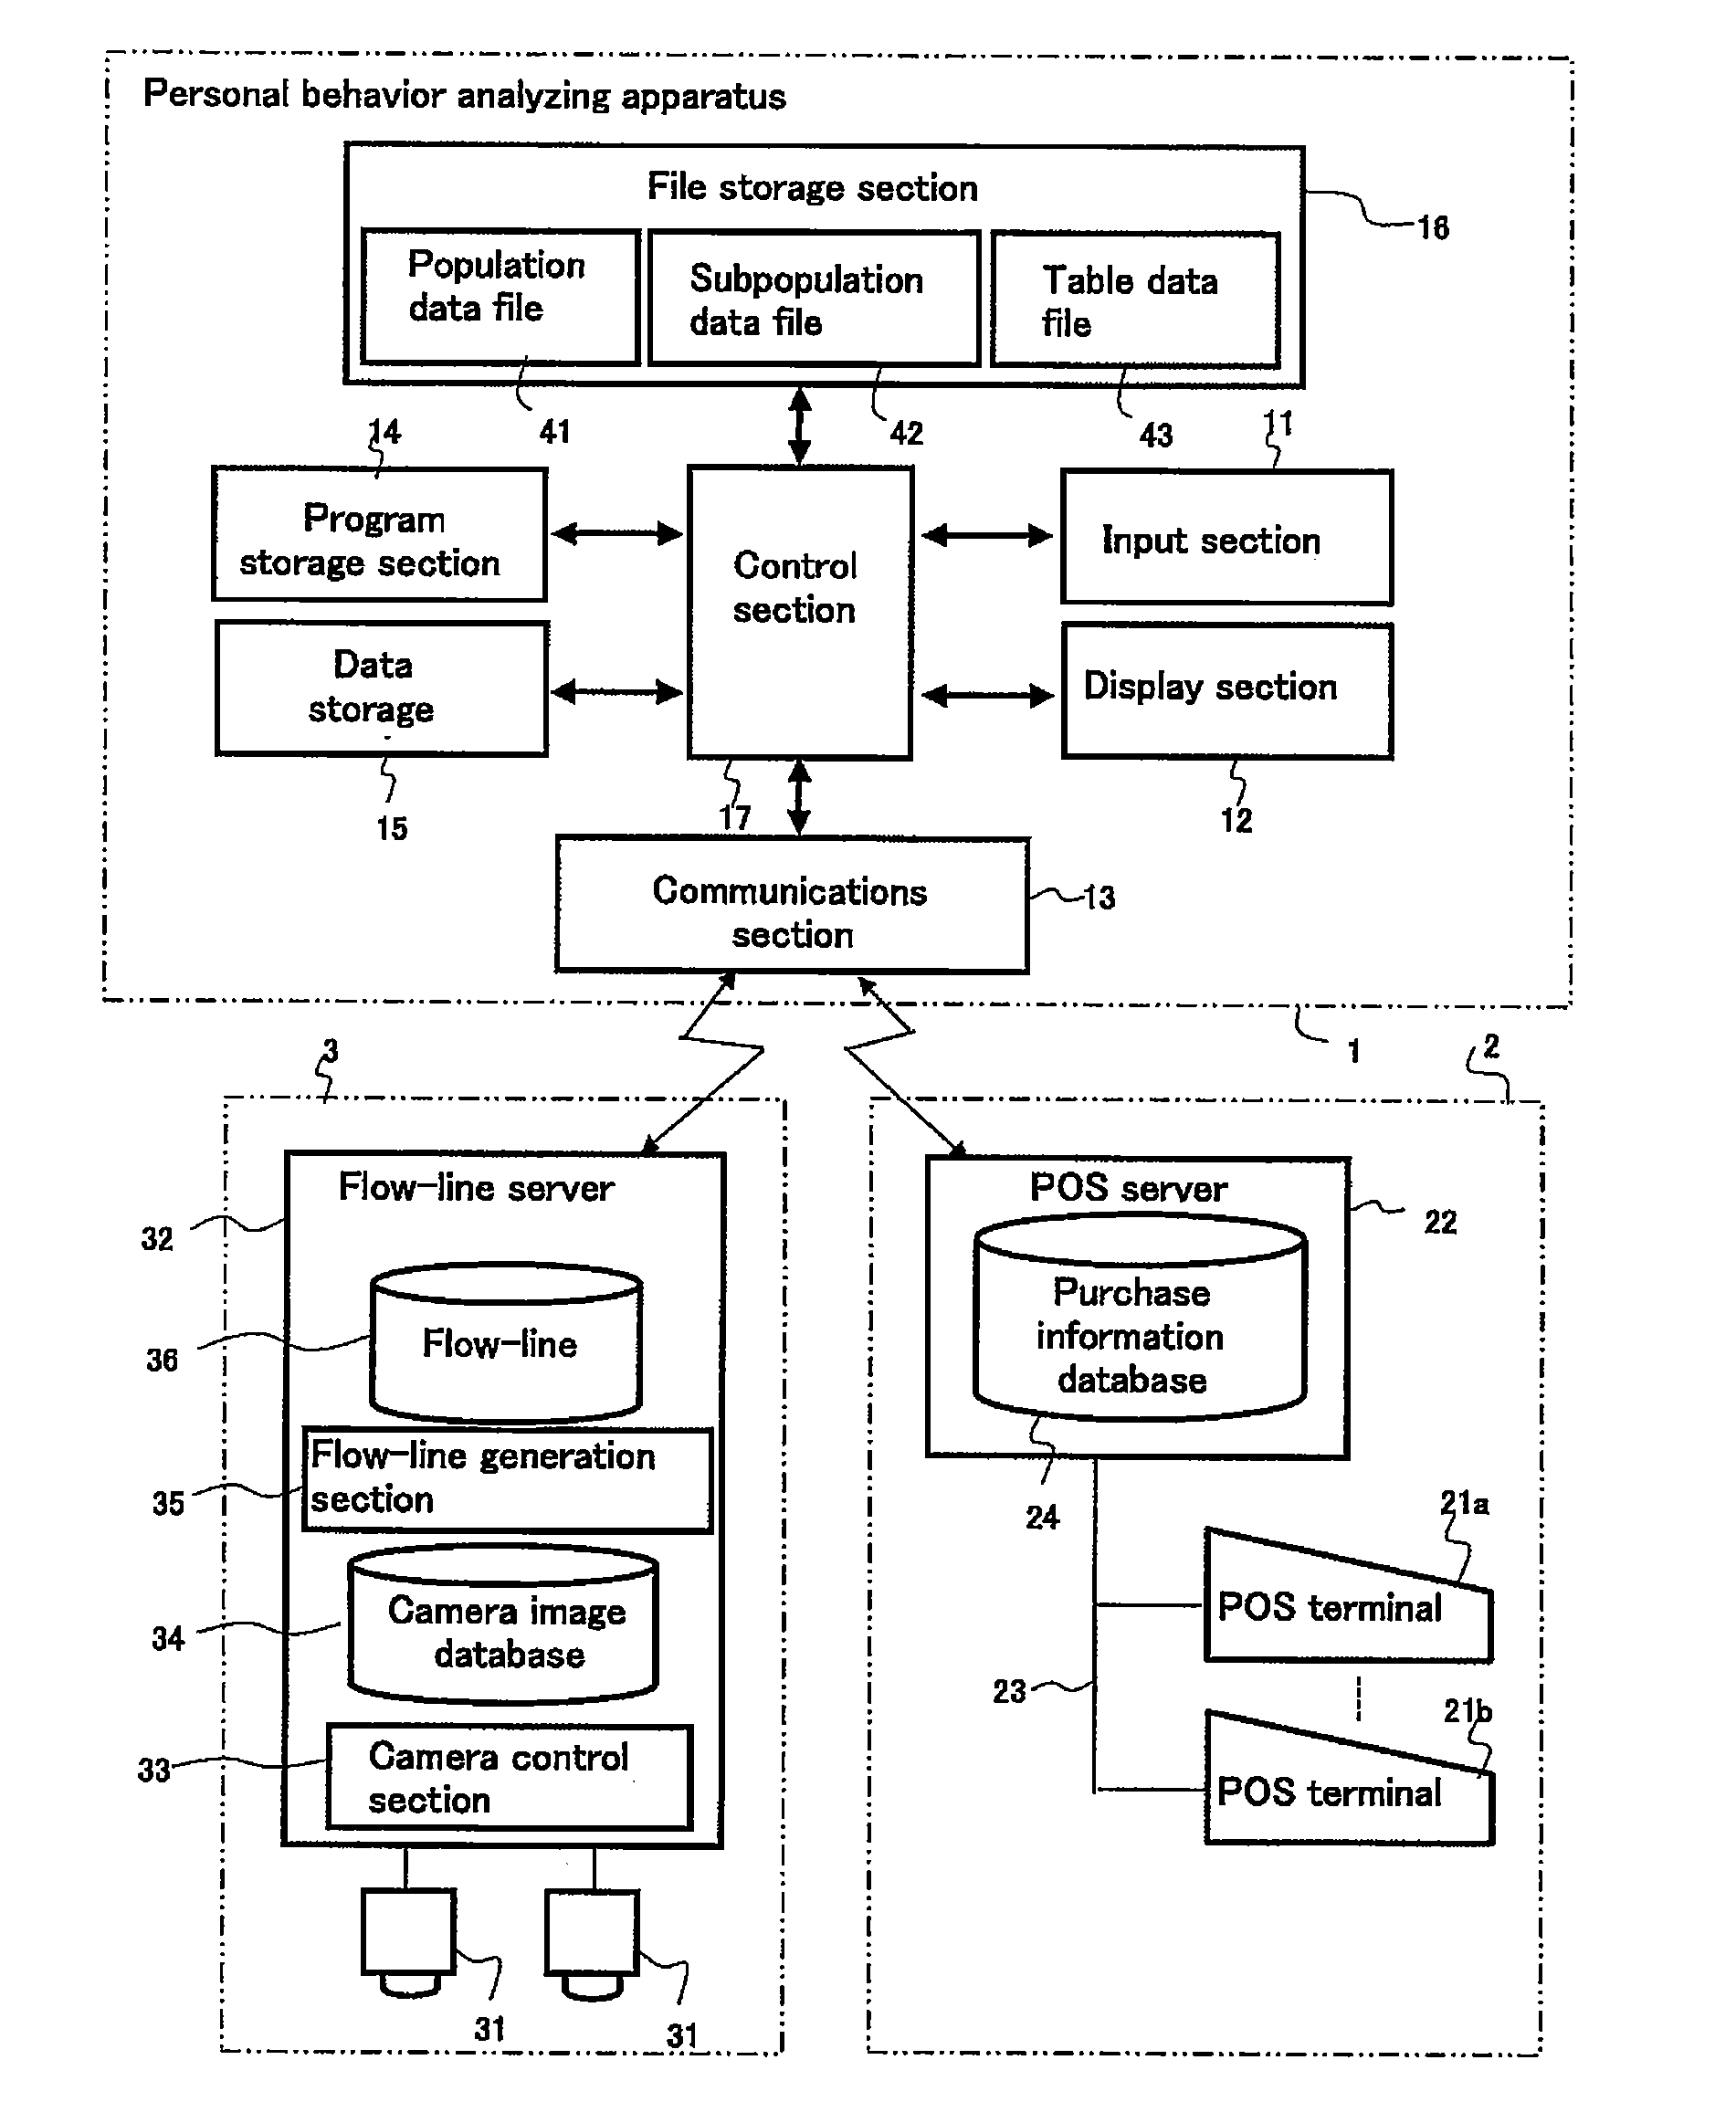 Apparatus and method for analyzing personal behavior